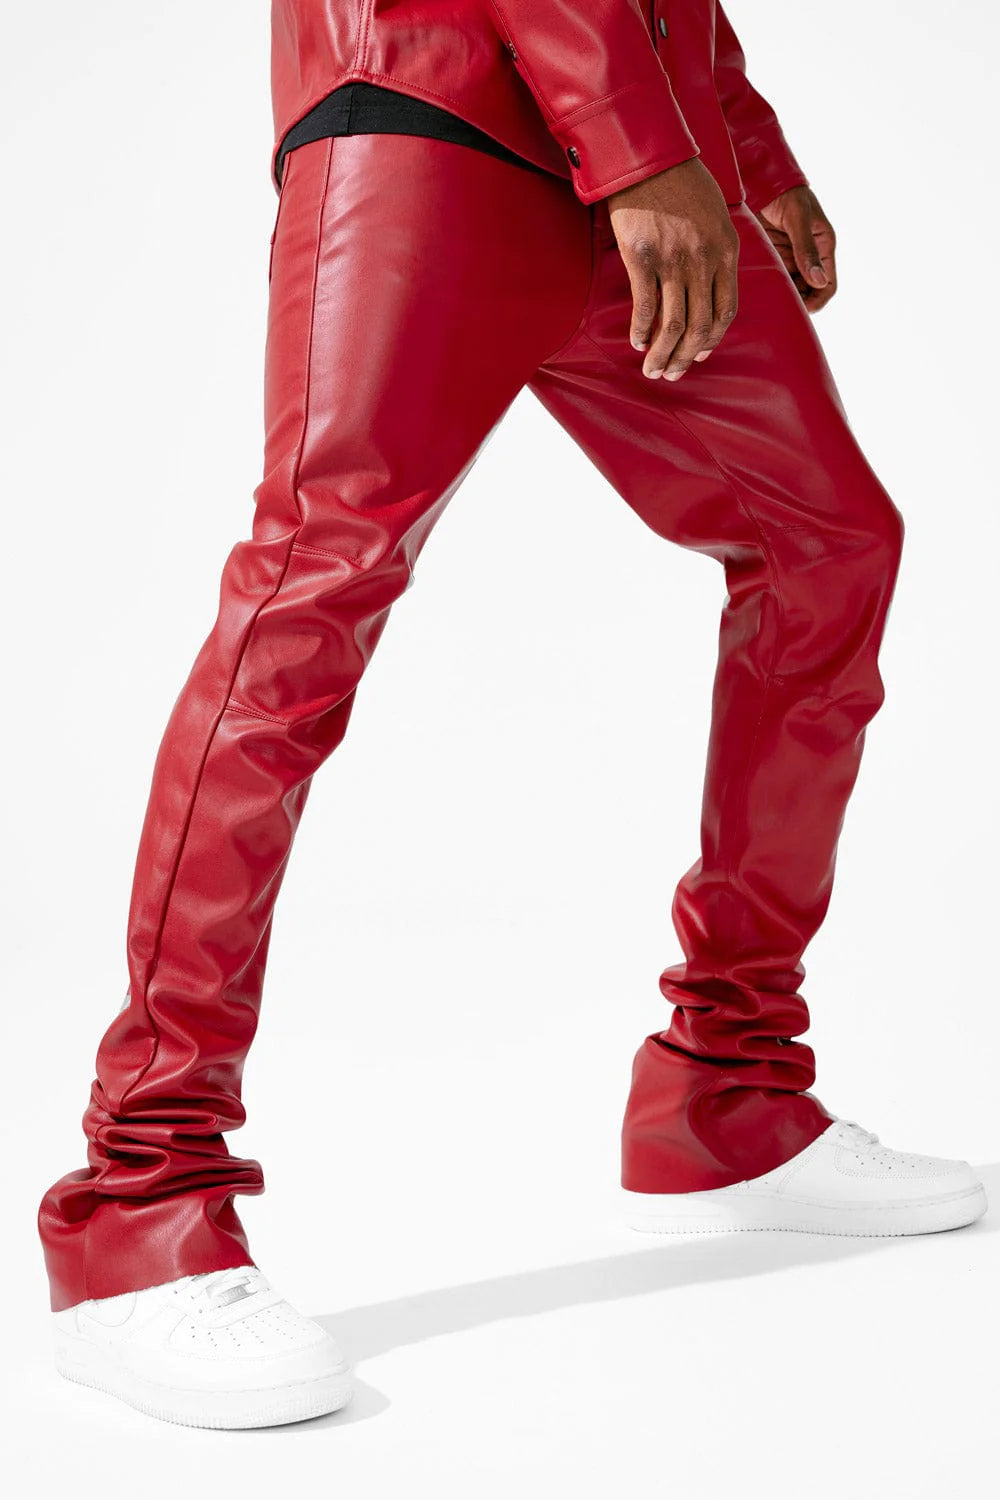 Ross Stacked - Thriller Pants - Red